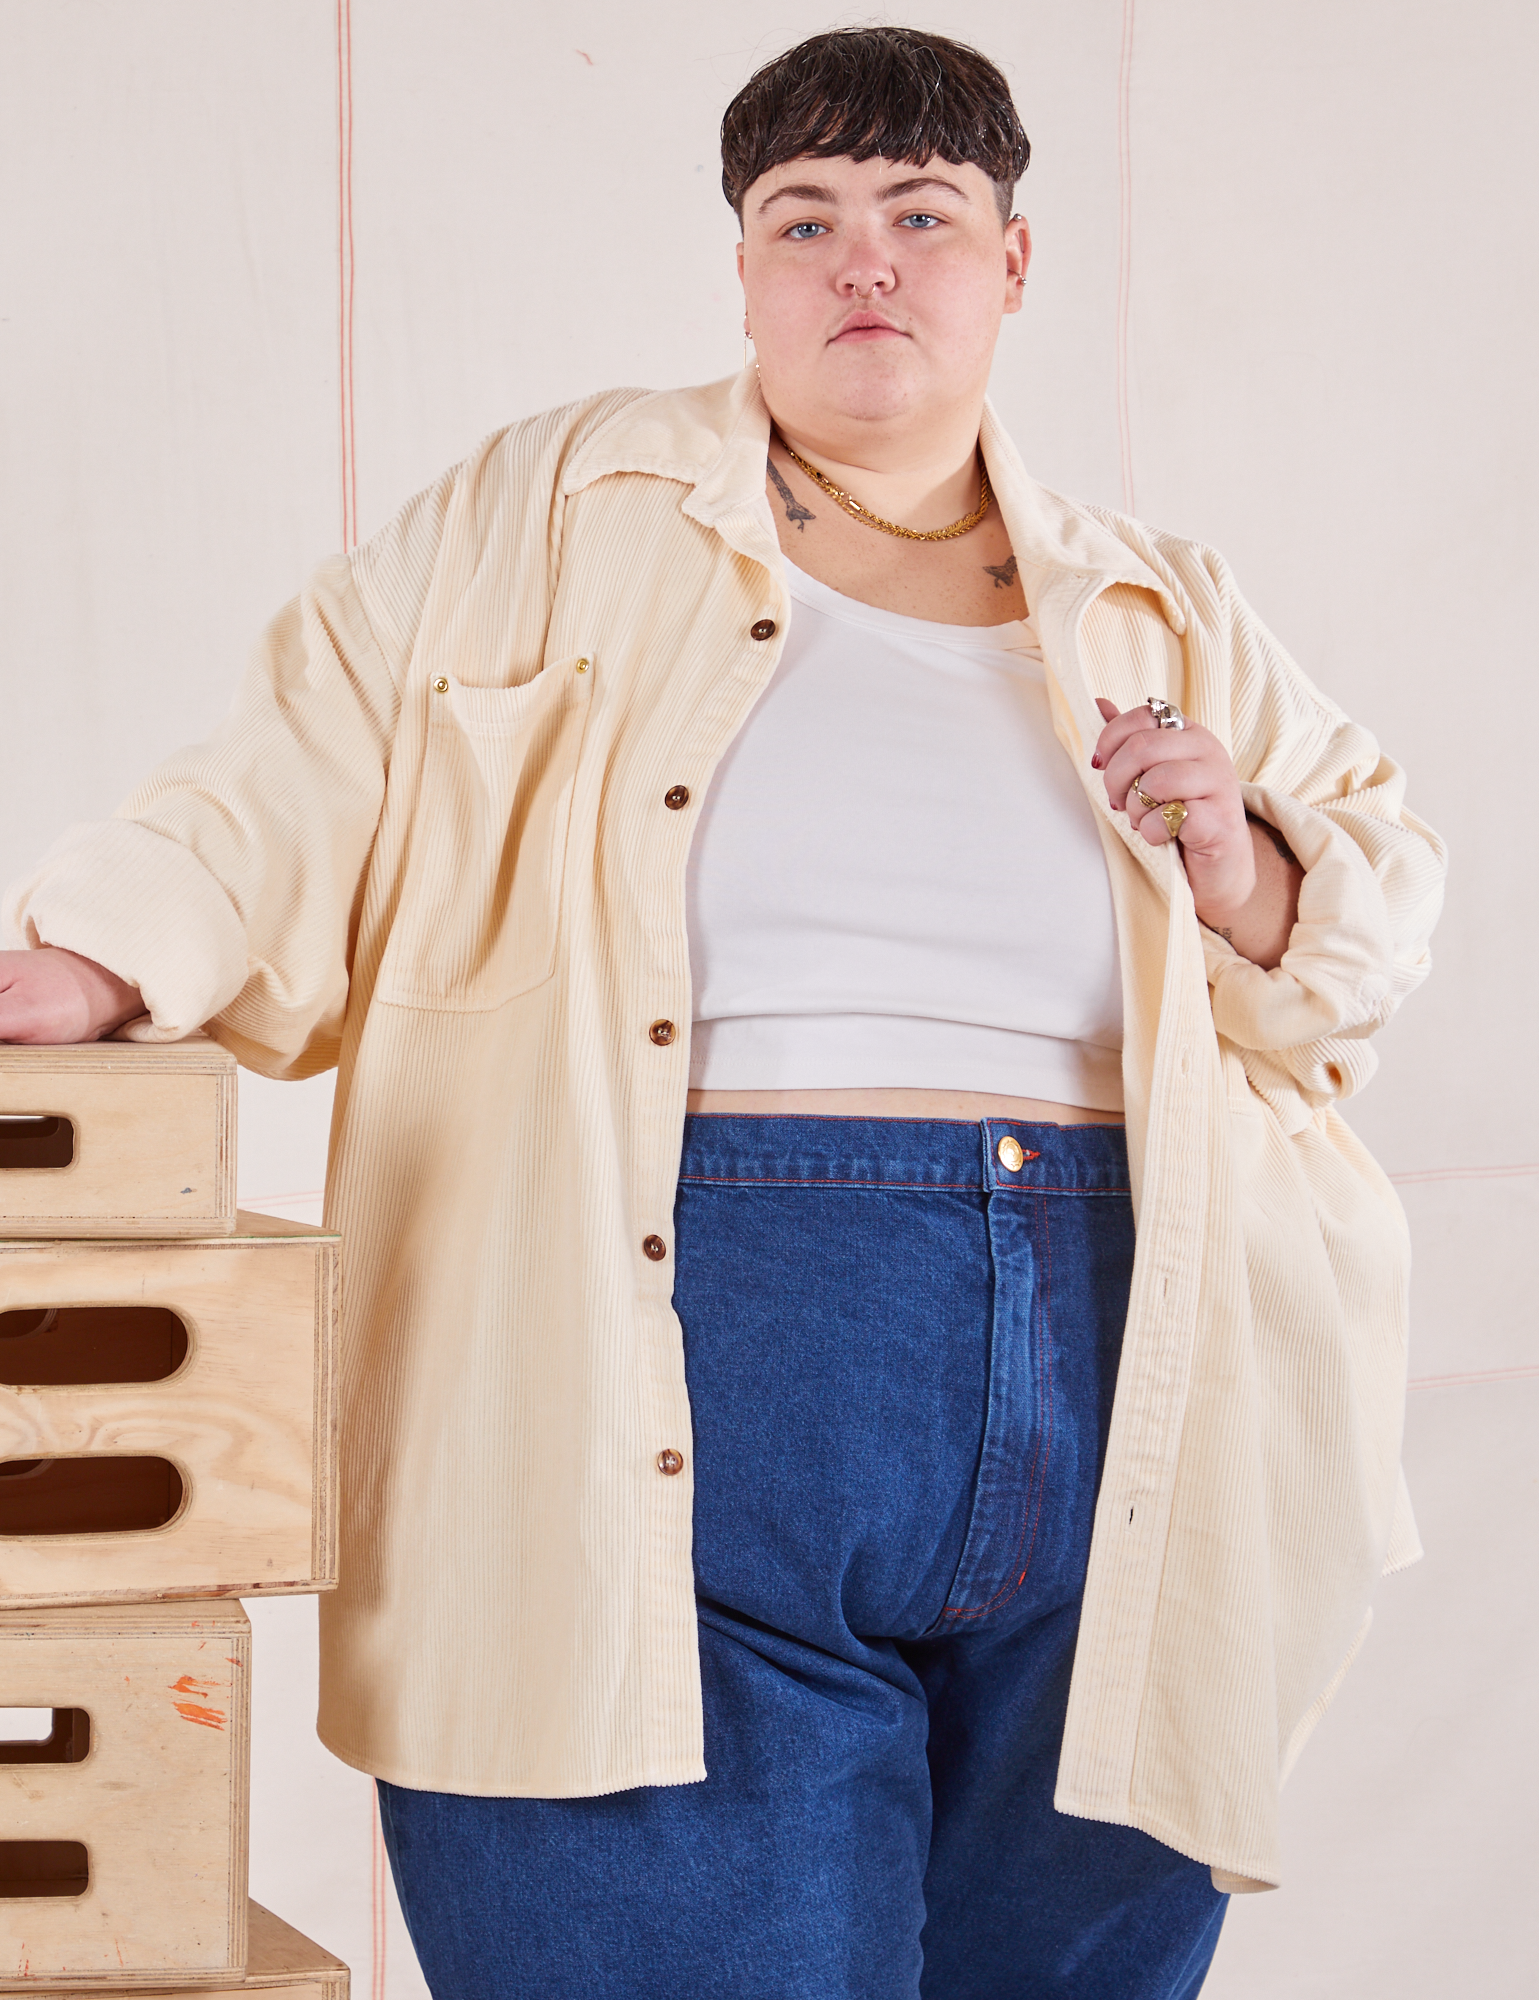 Jordan is 5'4" and wearing 4XL Corduroy Overshirt in Vintage Off-White with a vintage off-white Cropped Tank Tp underneath and dark wash Trouser Jeans